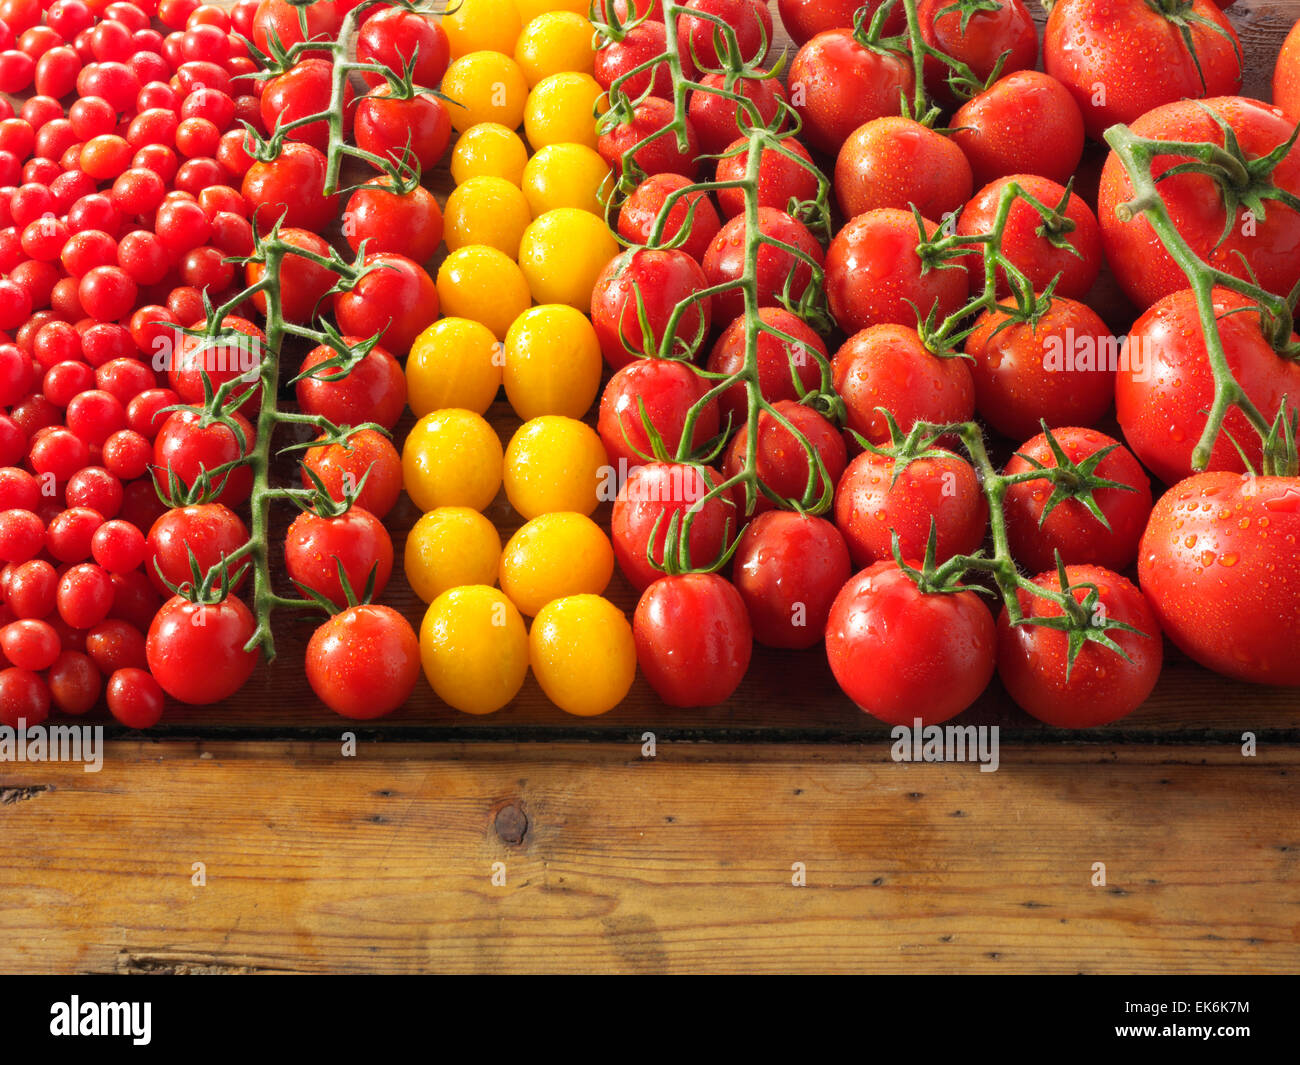 Mixed whole fresh yellow & red tomatoes on vines Stock Photo